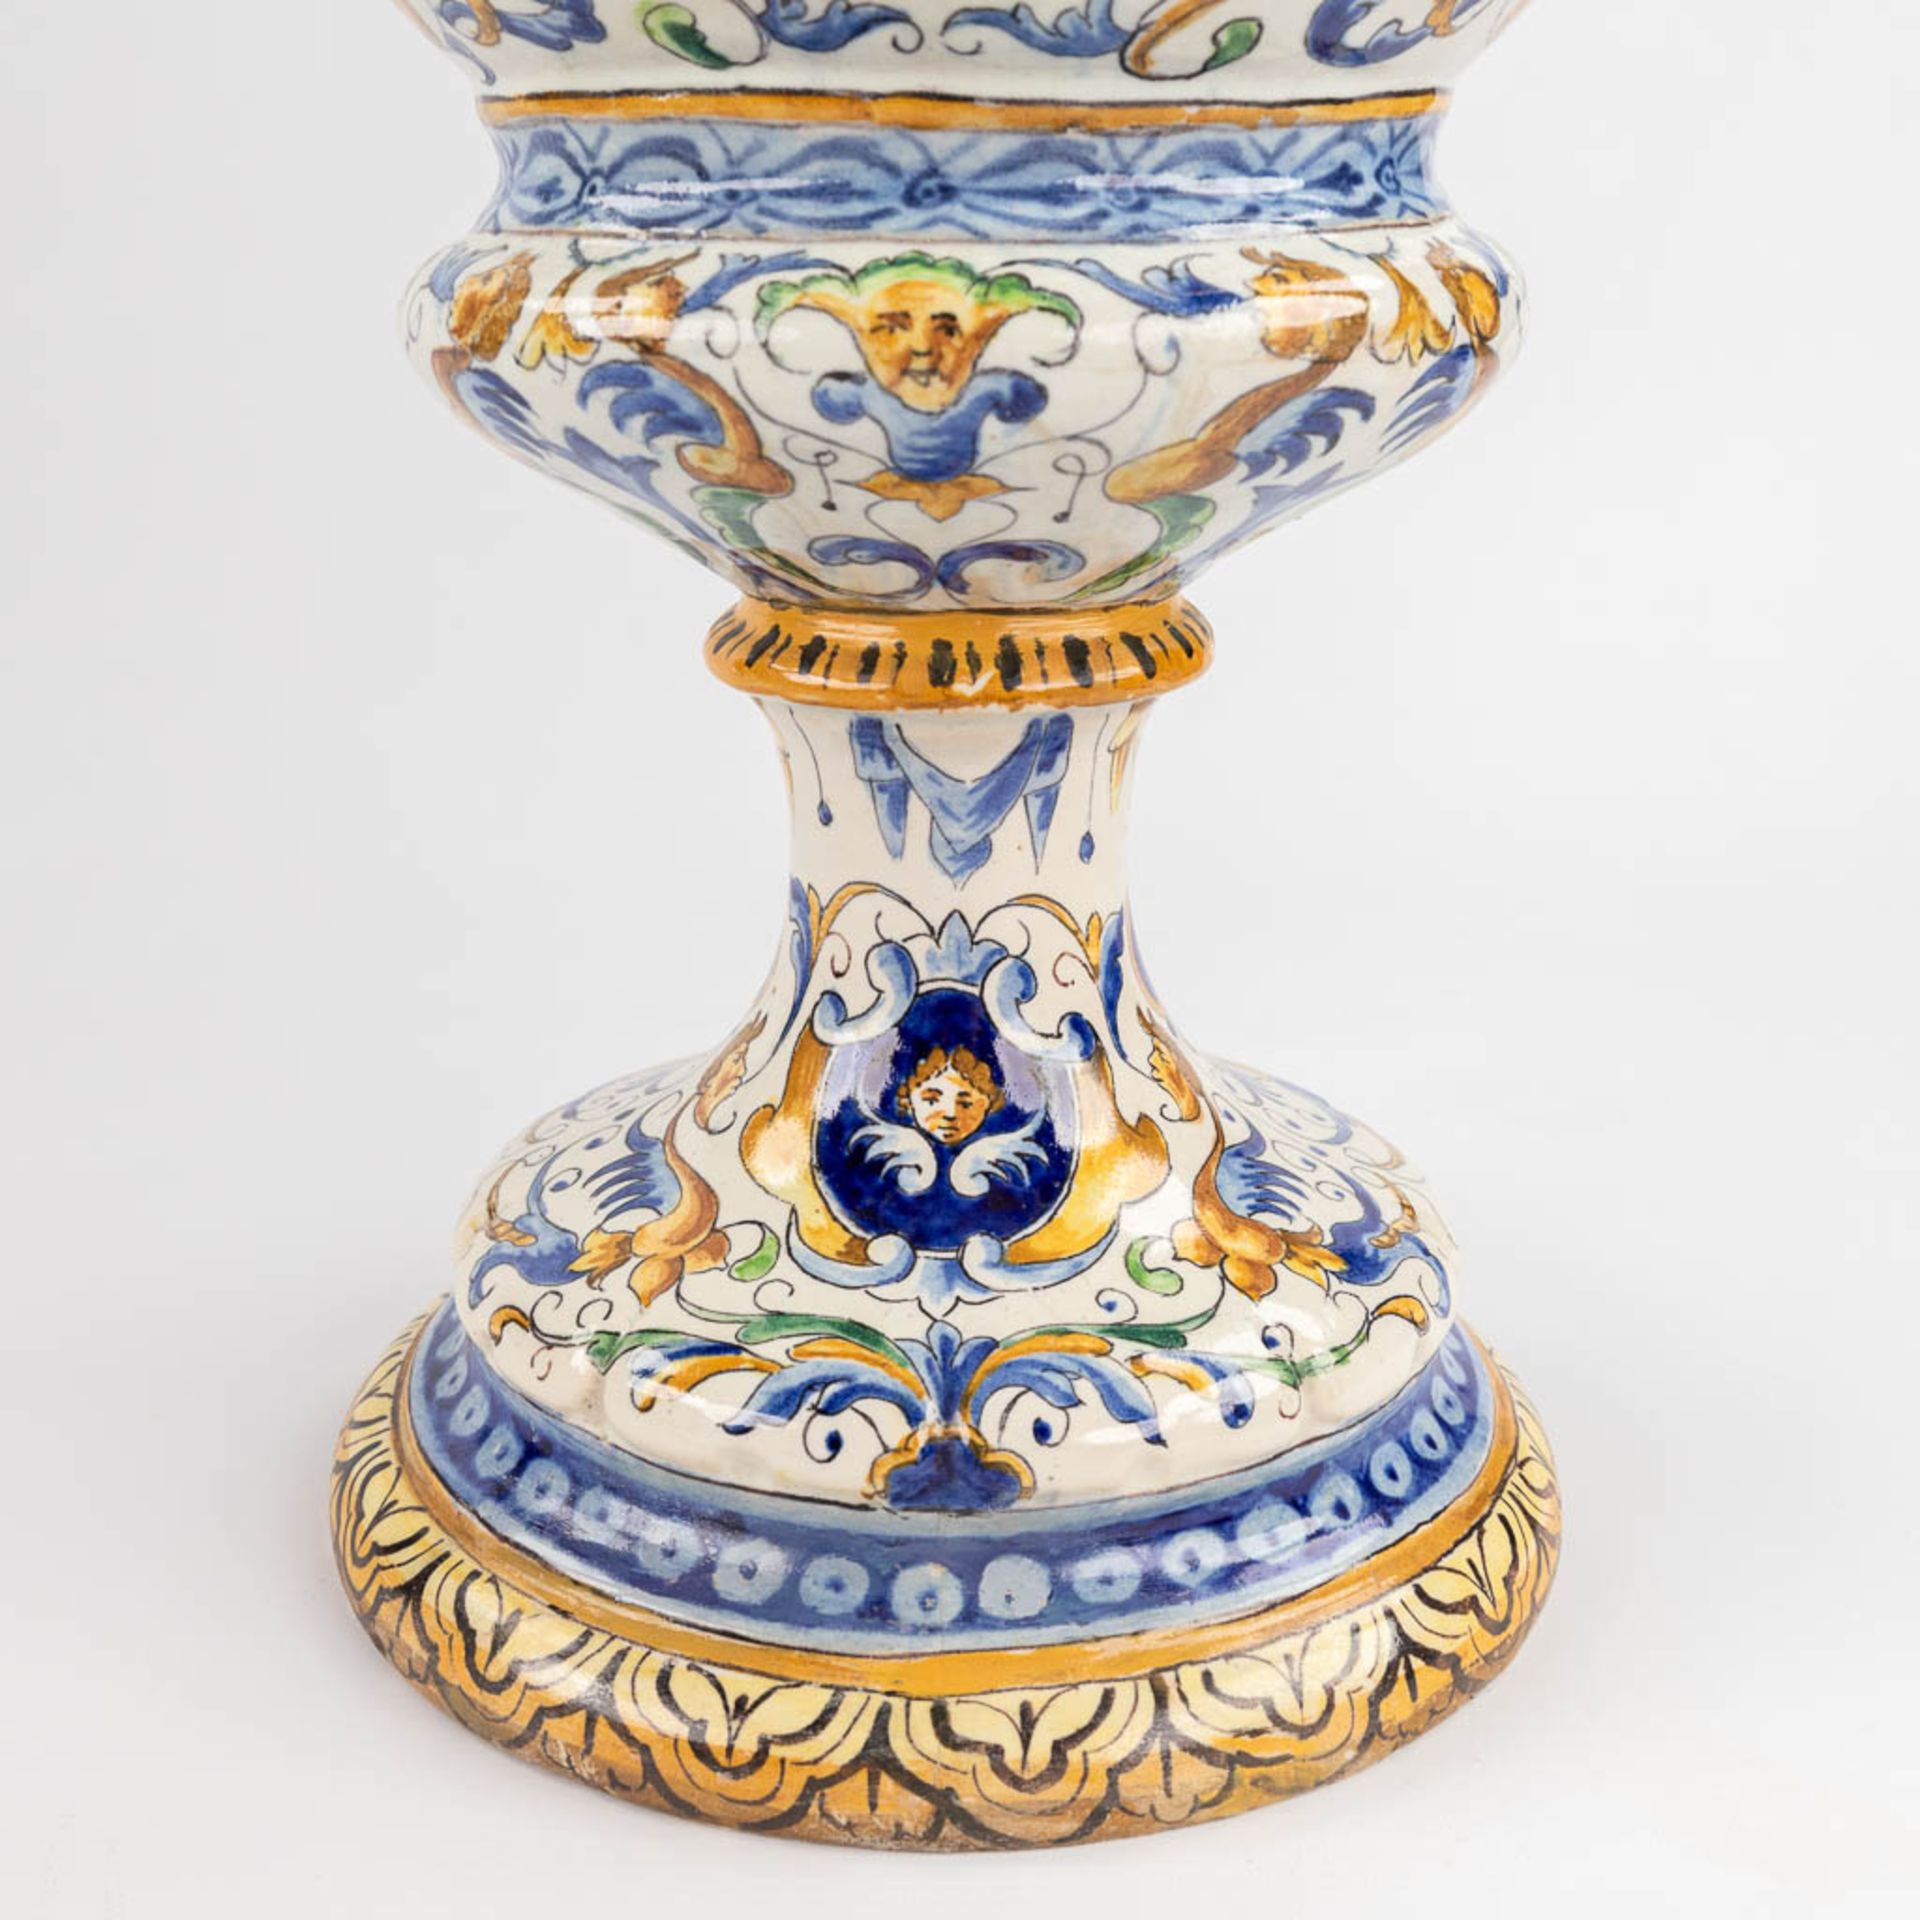 A pair of large vases, Italian Renaissance style, glazed faience. 20th C. (D:45 x W:45 x H:205 cm) - Image 13 of 31